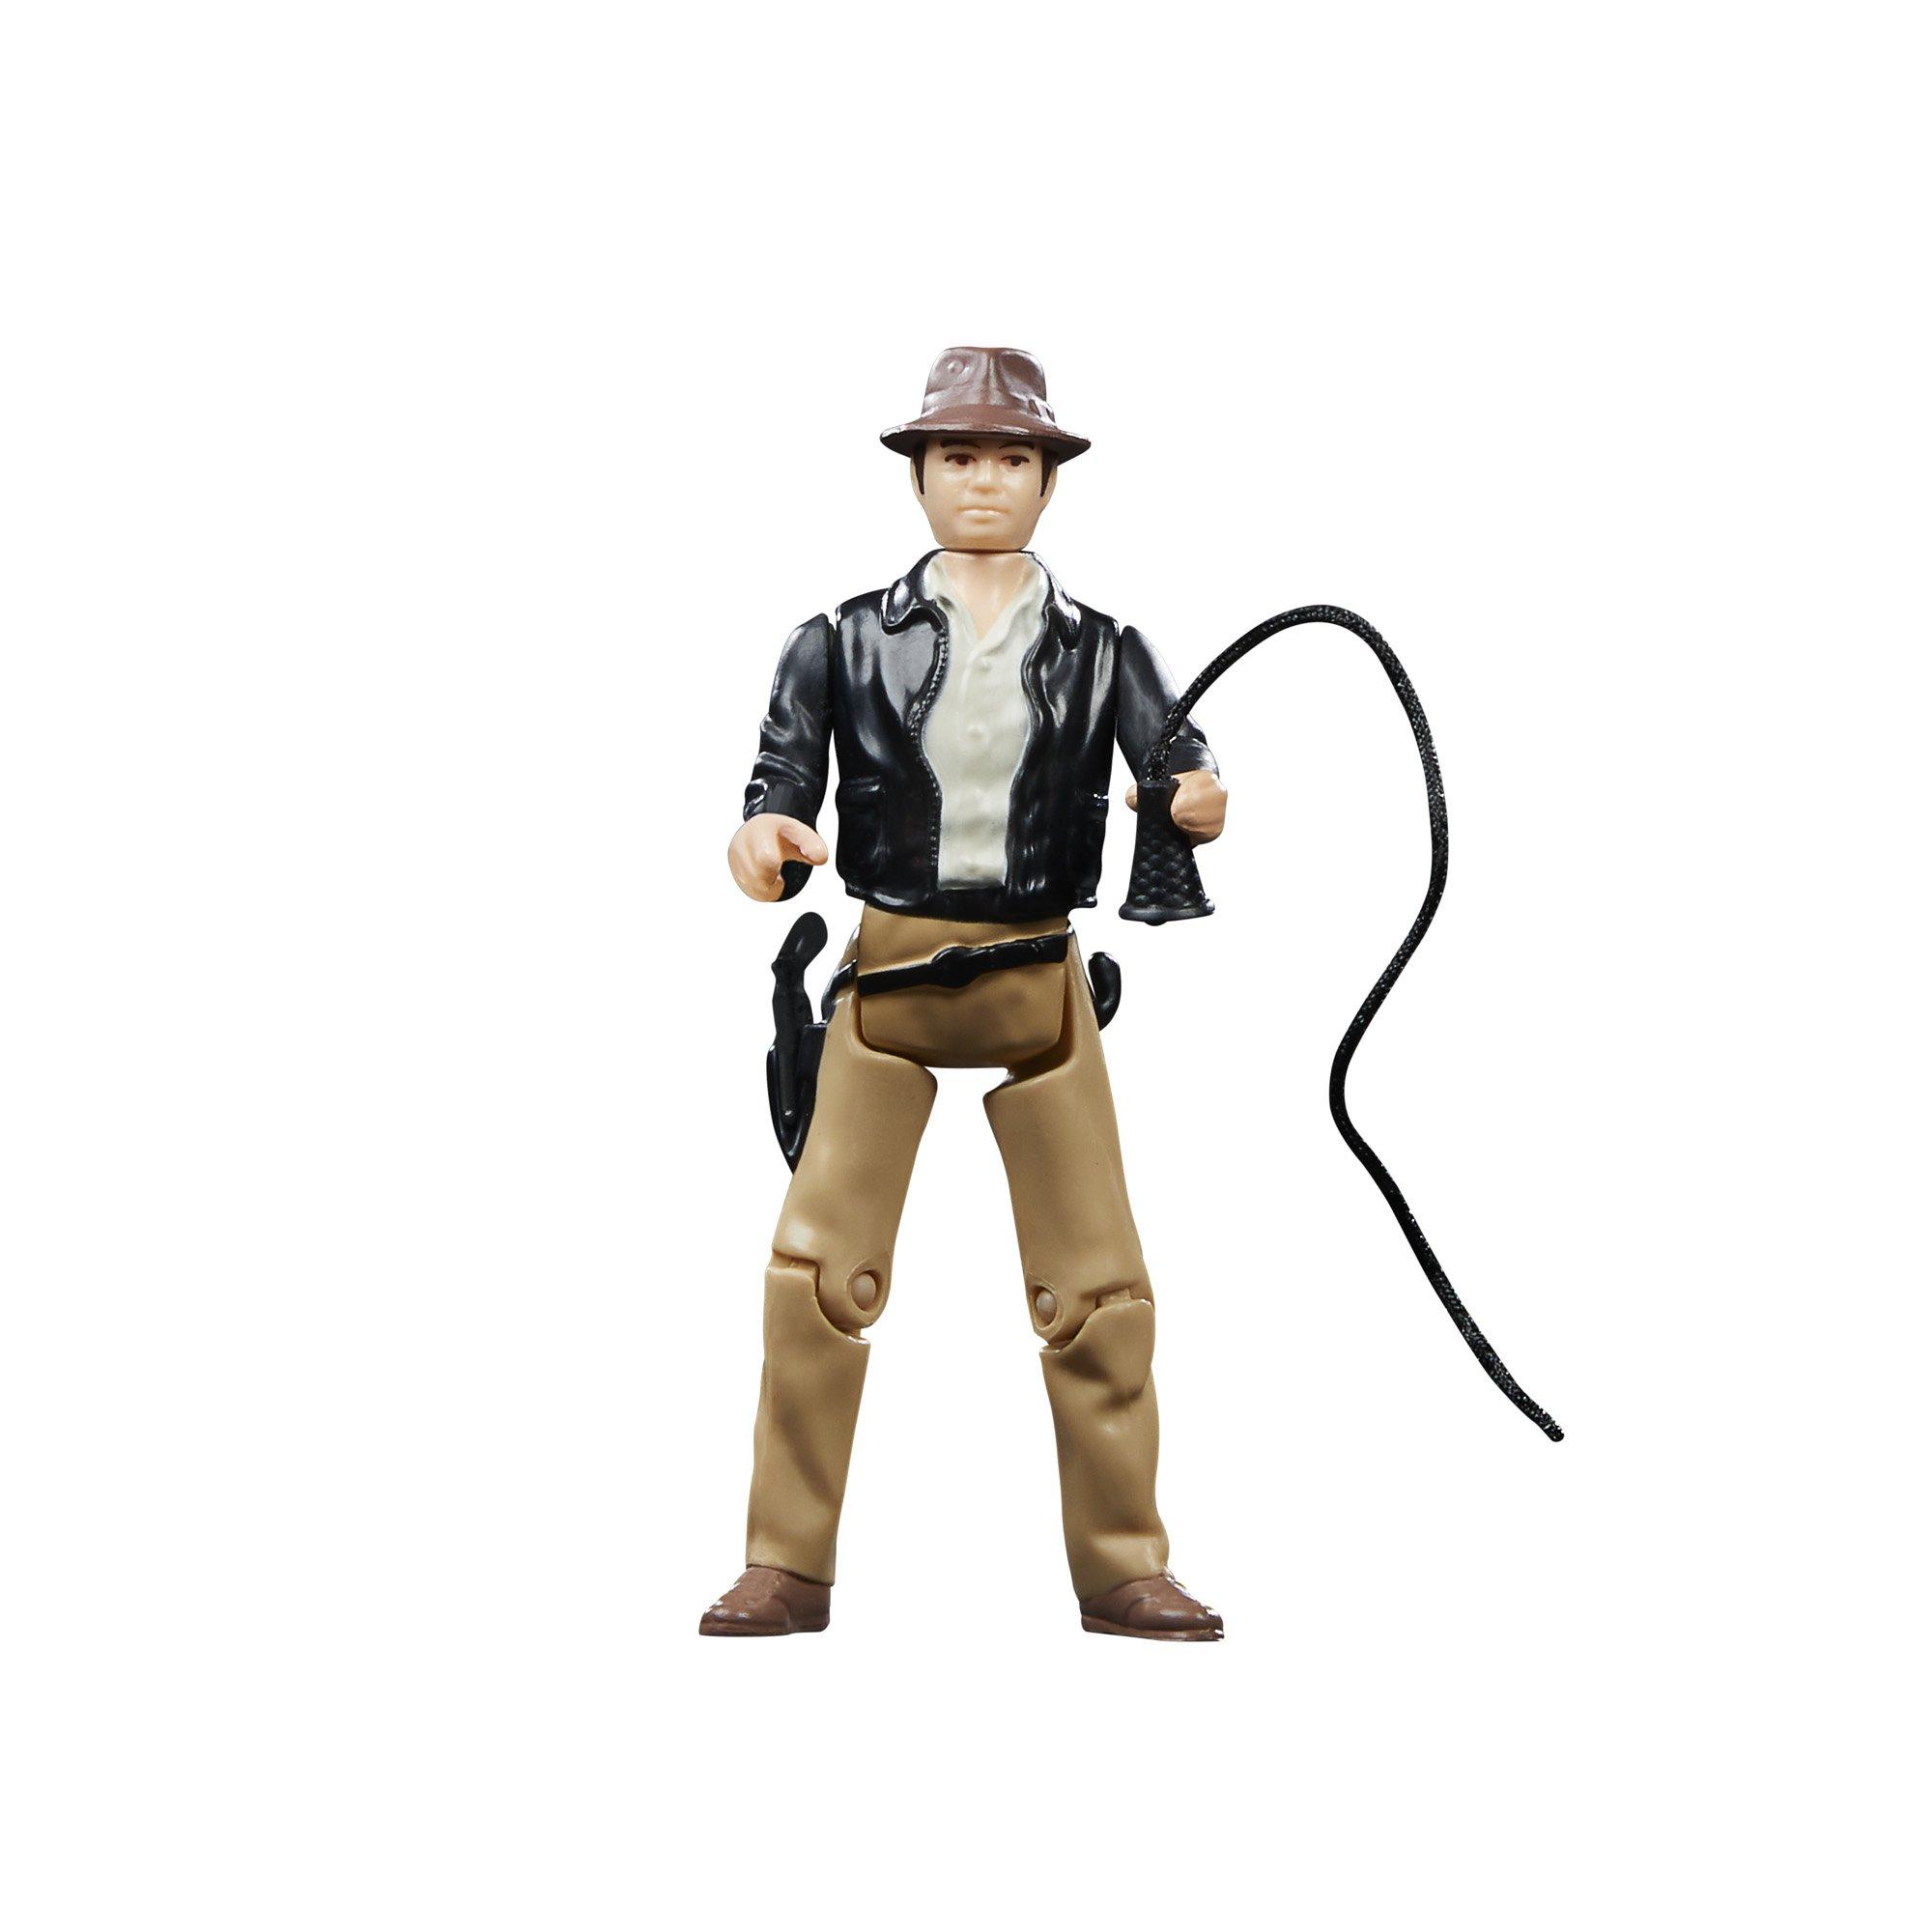 Hot Spot Collectibles and Toys - 2008 Last Crusade Indiana Jones Figure  3.75 Loose